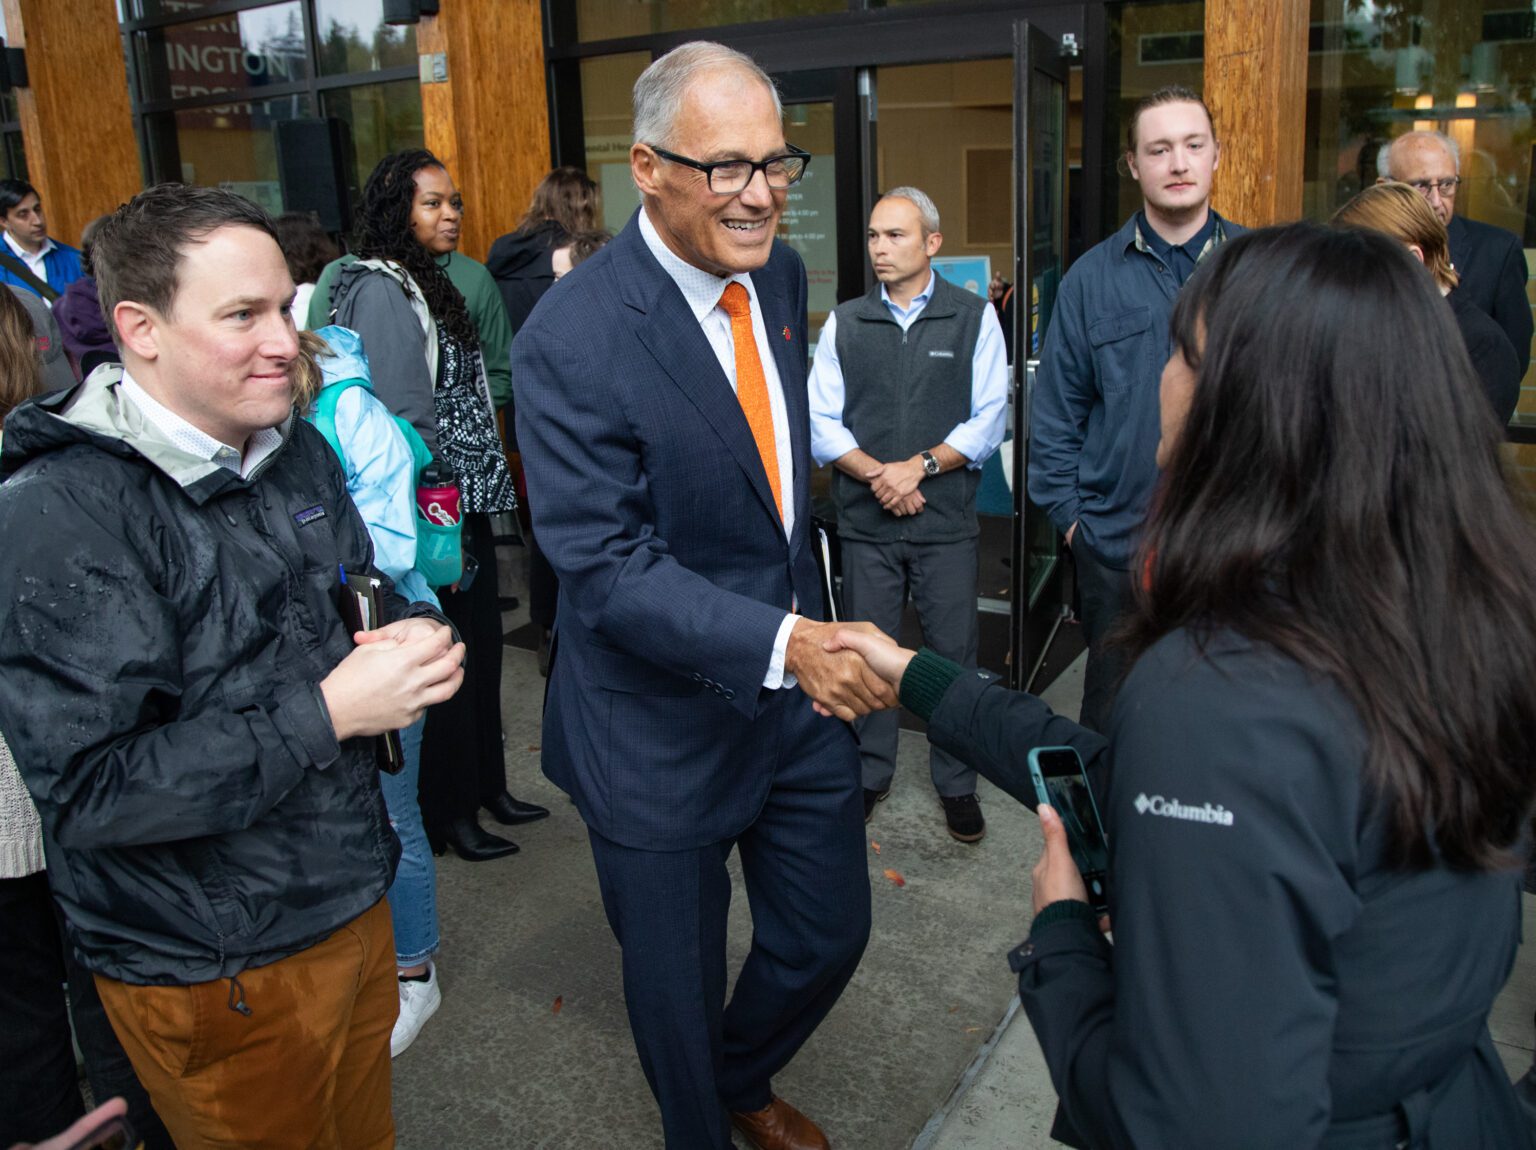 Gov. Jay Inslee shakes hands with audience members at the end of the press conference.